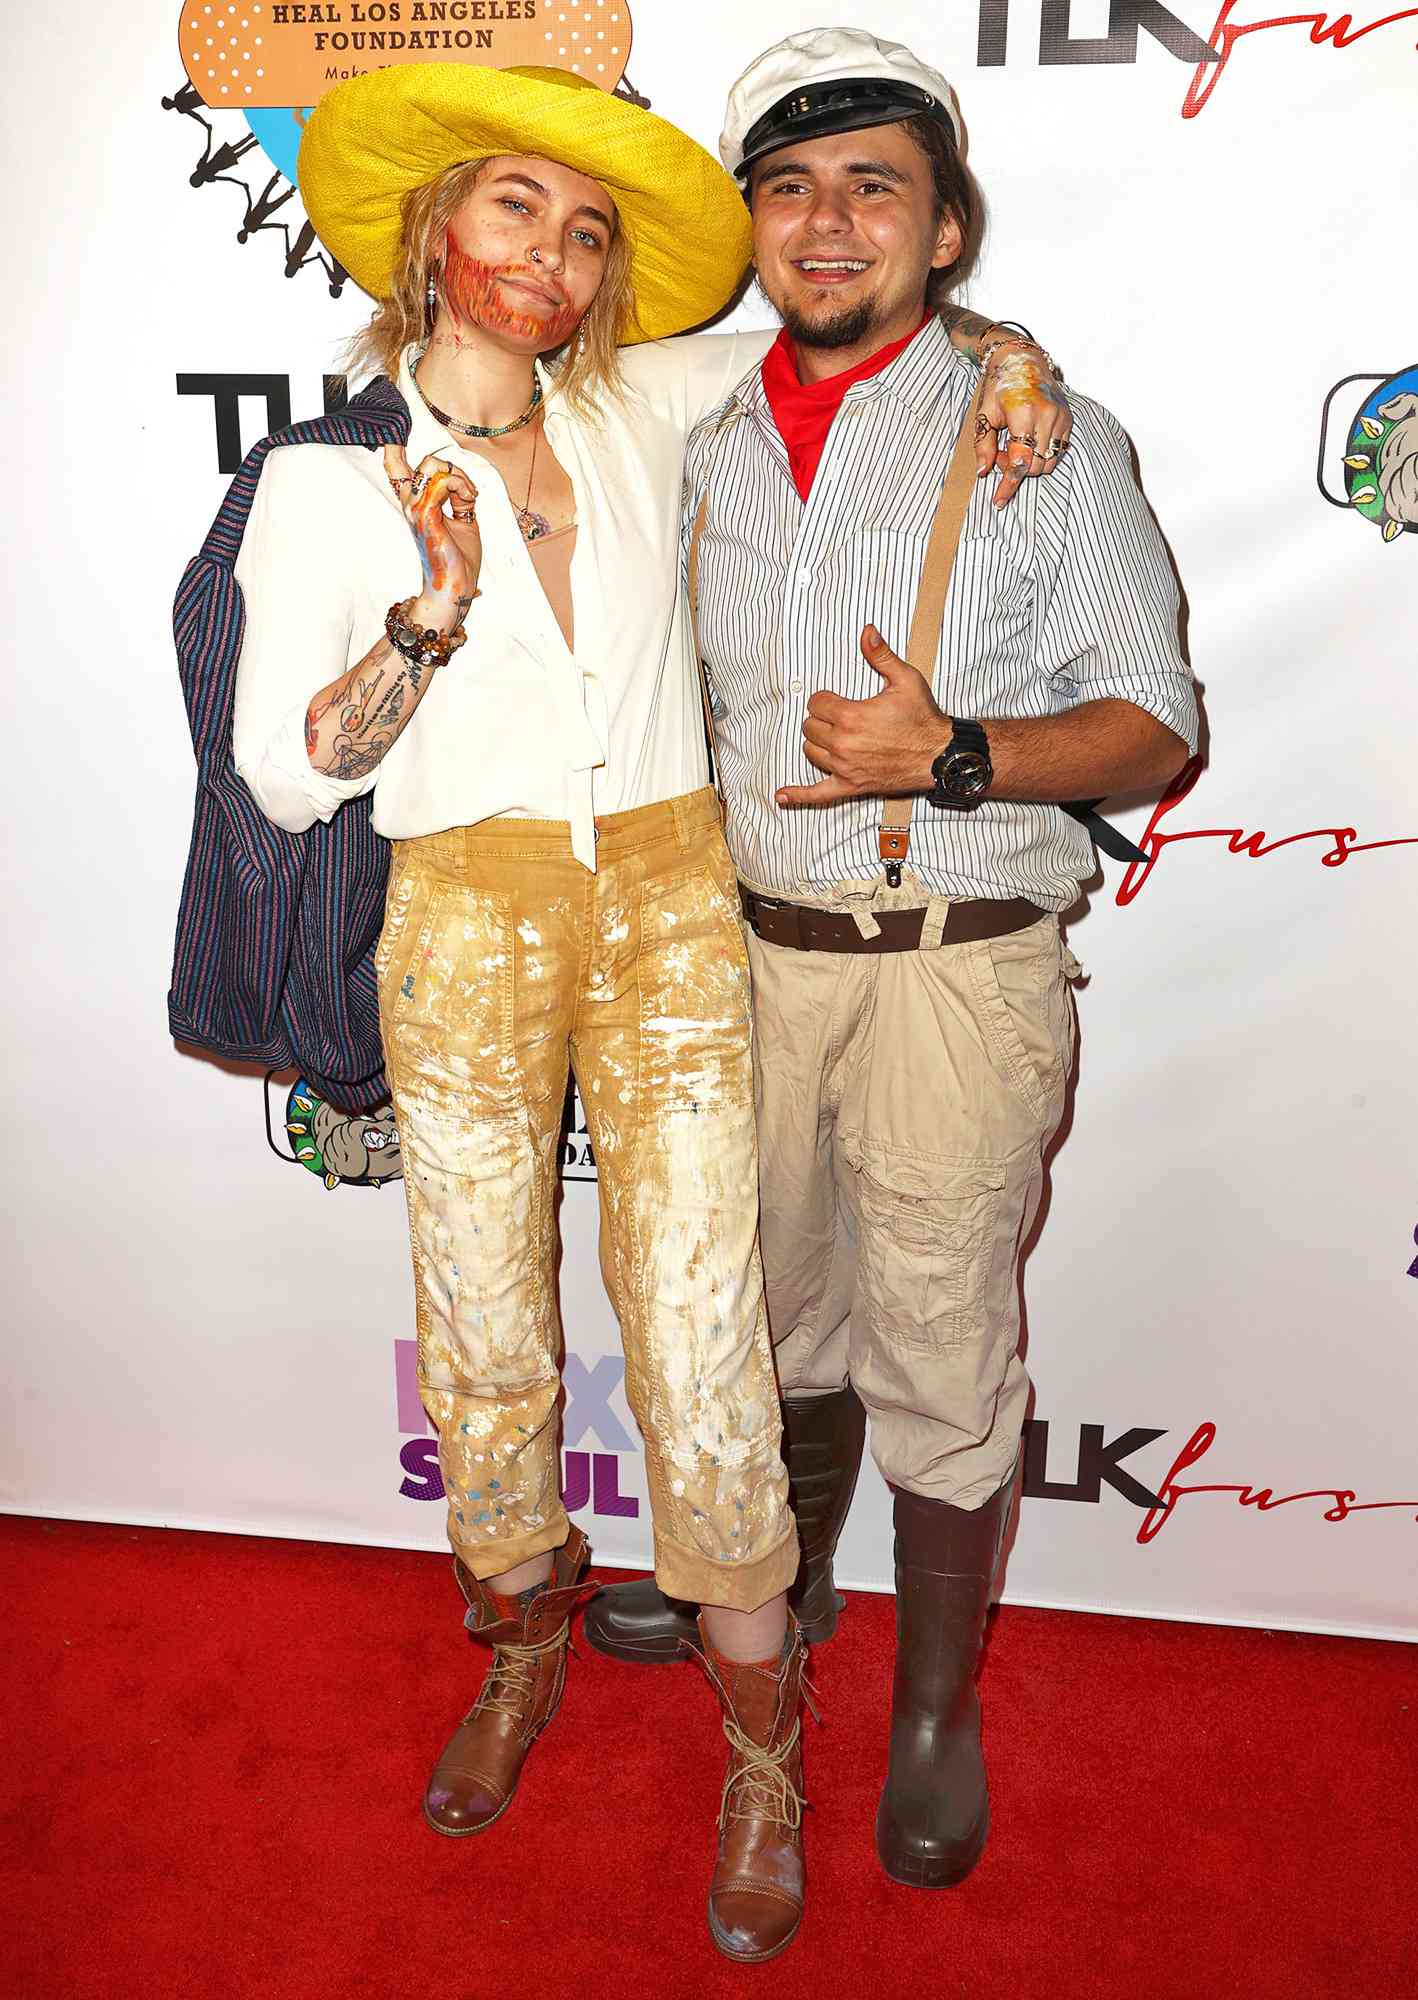 Paris Jackson and Prince Michael Jackson attend the "Thriller Night" Halloween Party hosted by Prince Michael Jackson and The Heal Los Angeles Foundation on October 29, 2021 in Encino, California.